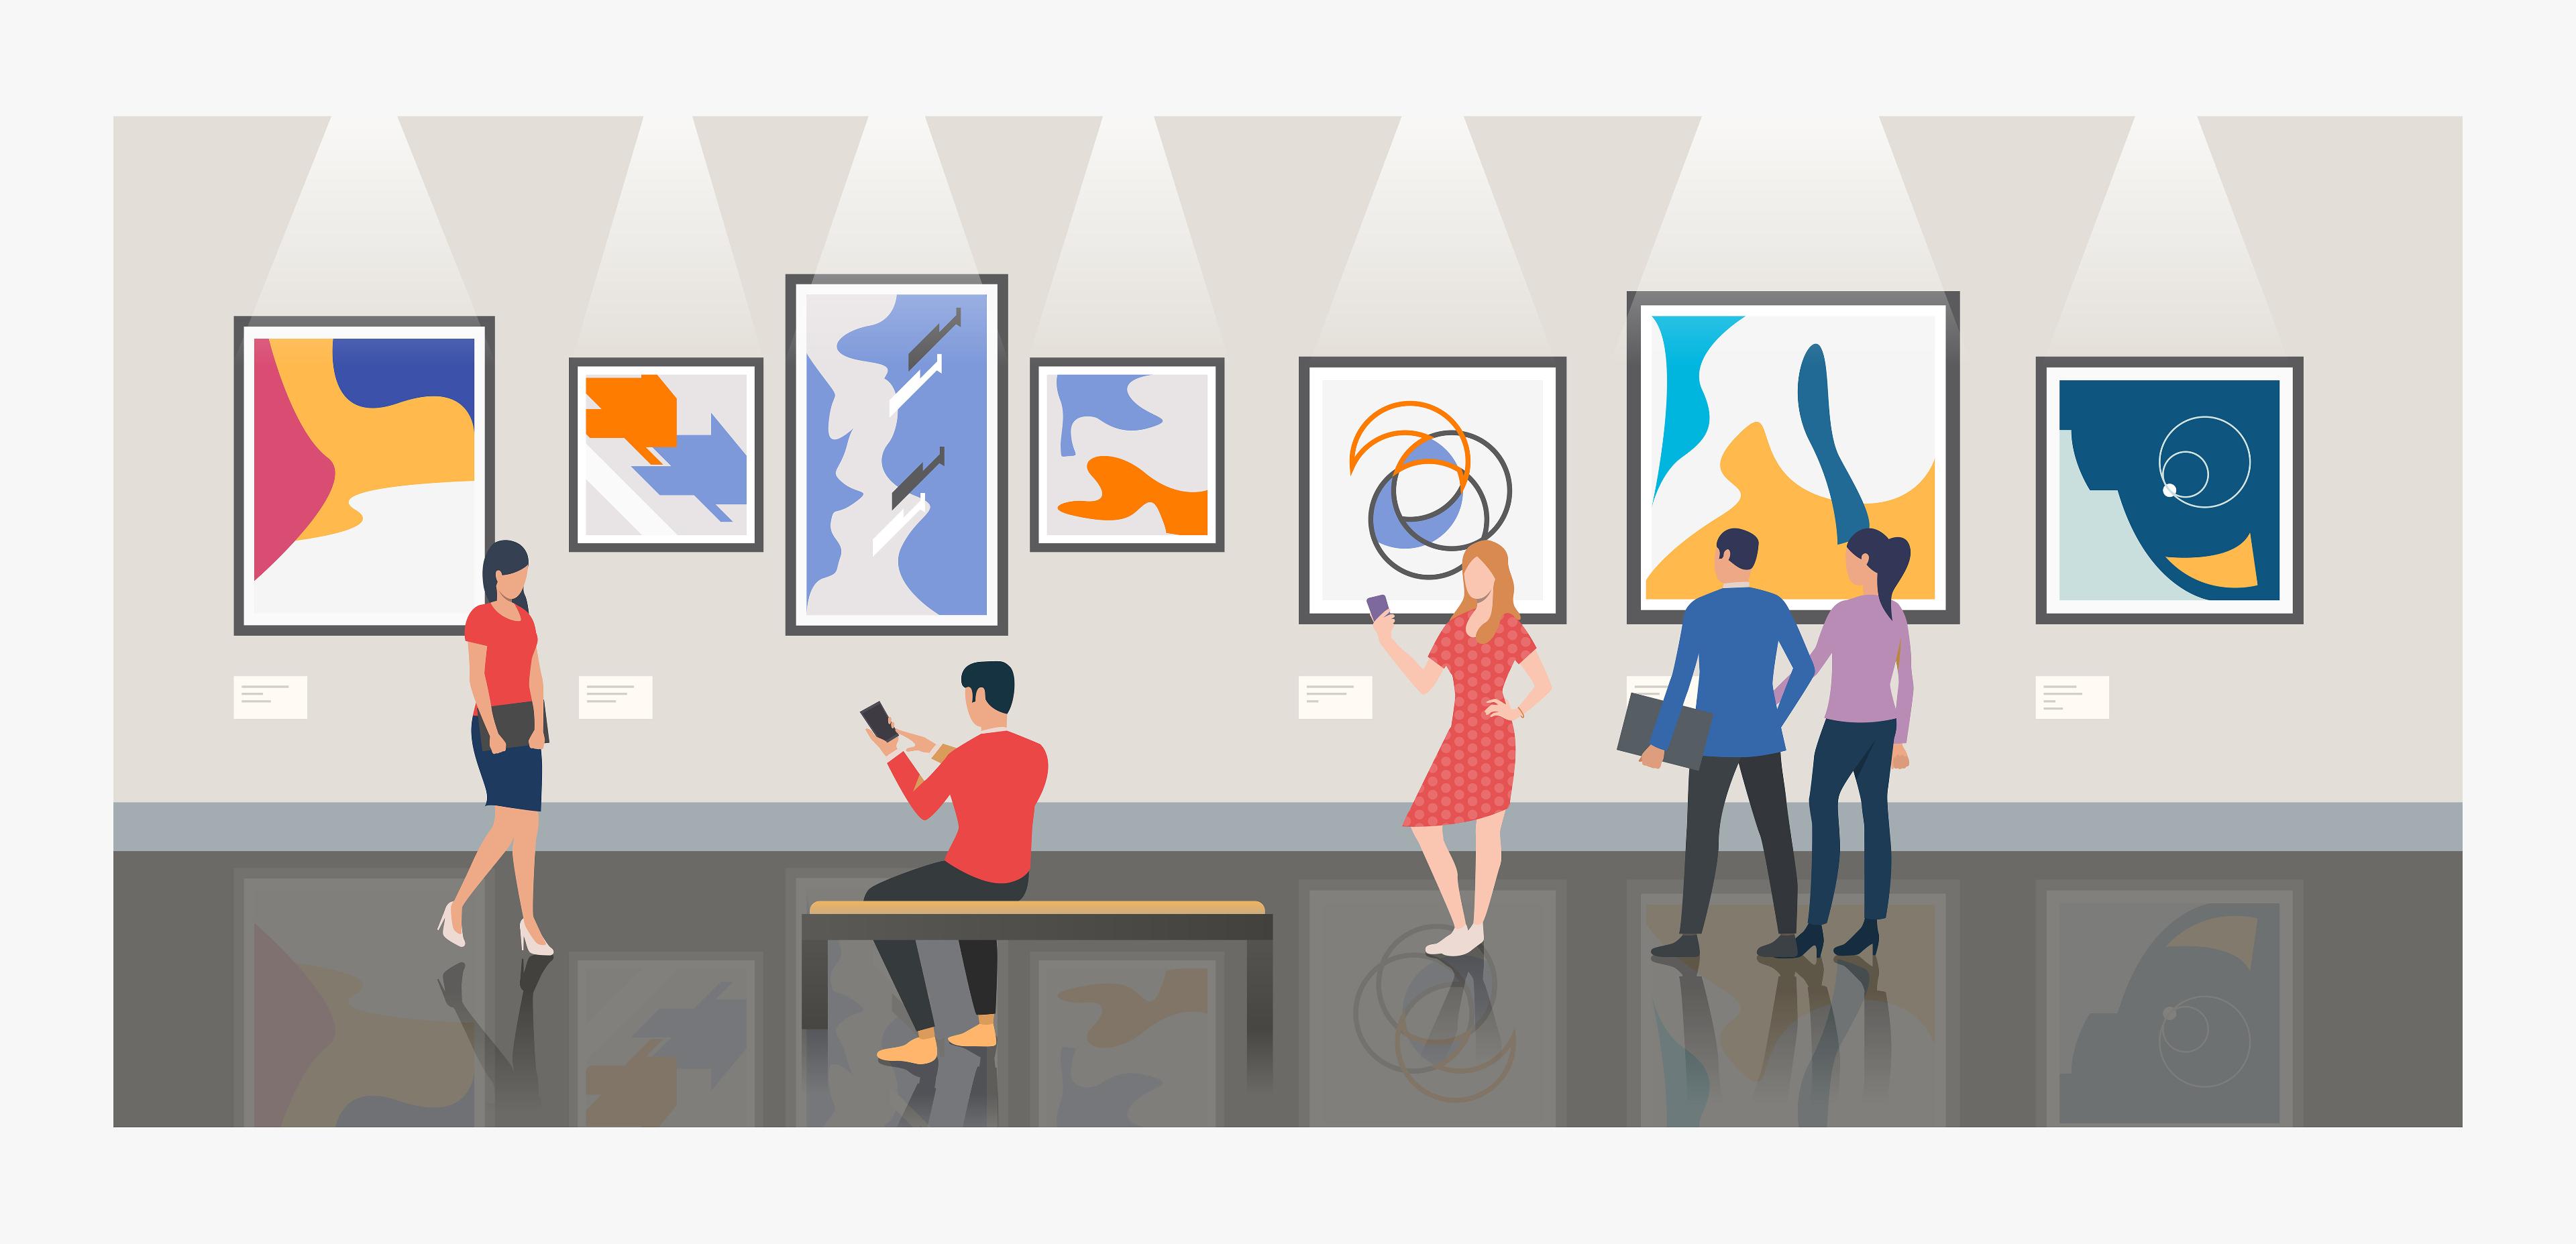 https://ru.freepik.com/free-vector/men-and-women-visiting-museum-or-art-gallery-illustration_4332400.htm#fromView=search&page=1&position=3&uuid=c5c4964e-4e26-4e03-b94e-004903010b48